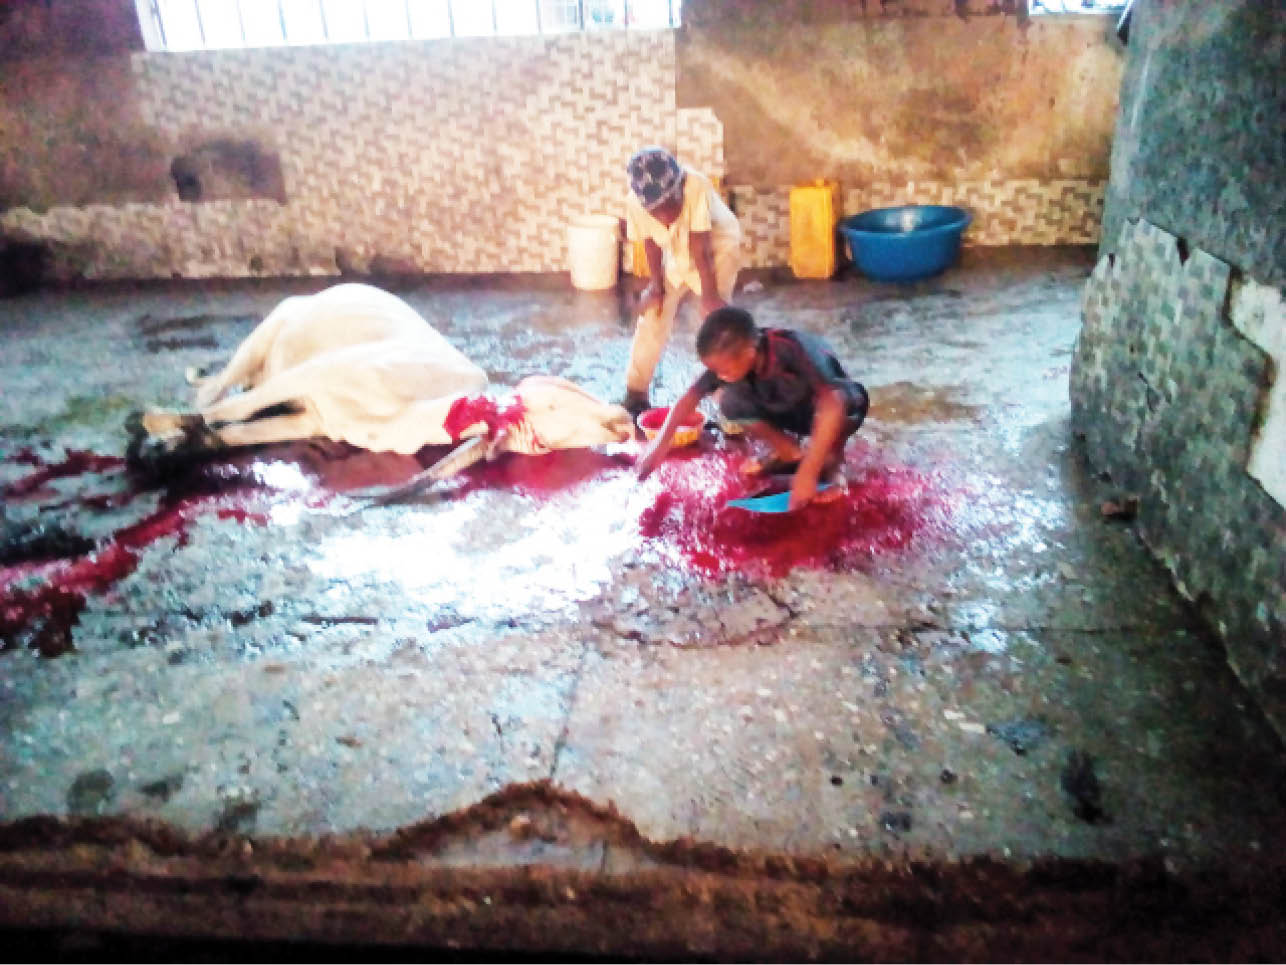 Some children fetching blood from a slaughtered cow